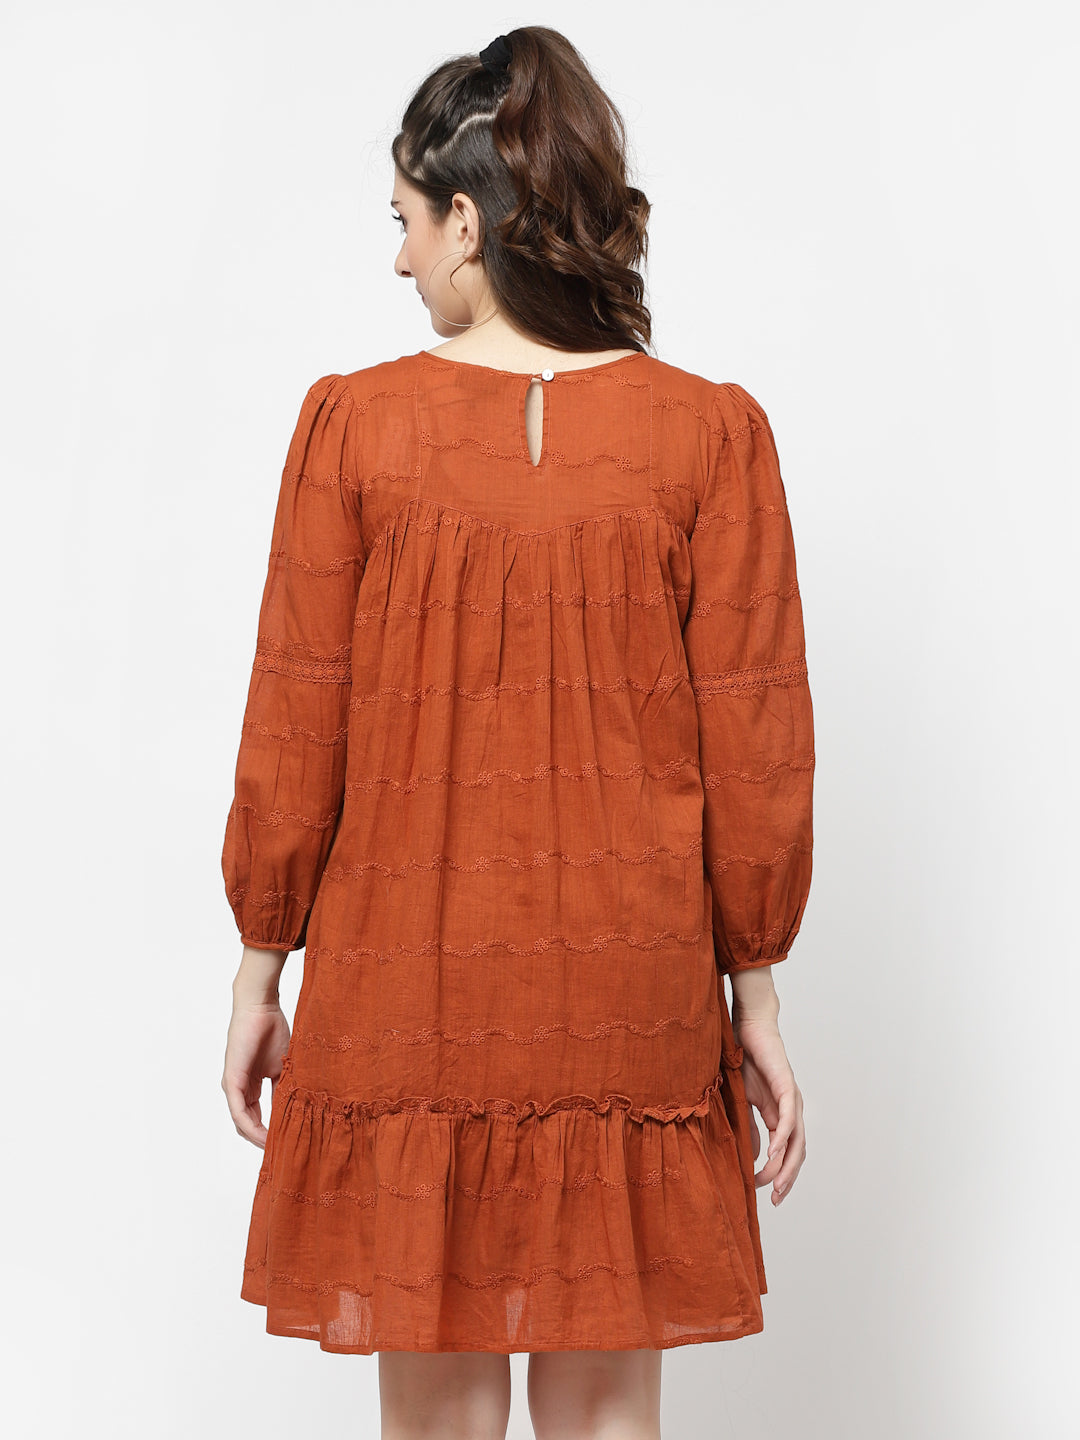 Terquois A-line Casual Dress Emblished with Lace Has Round Neck Dresses TERQUOIS   